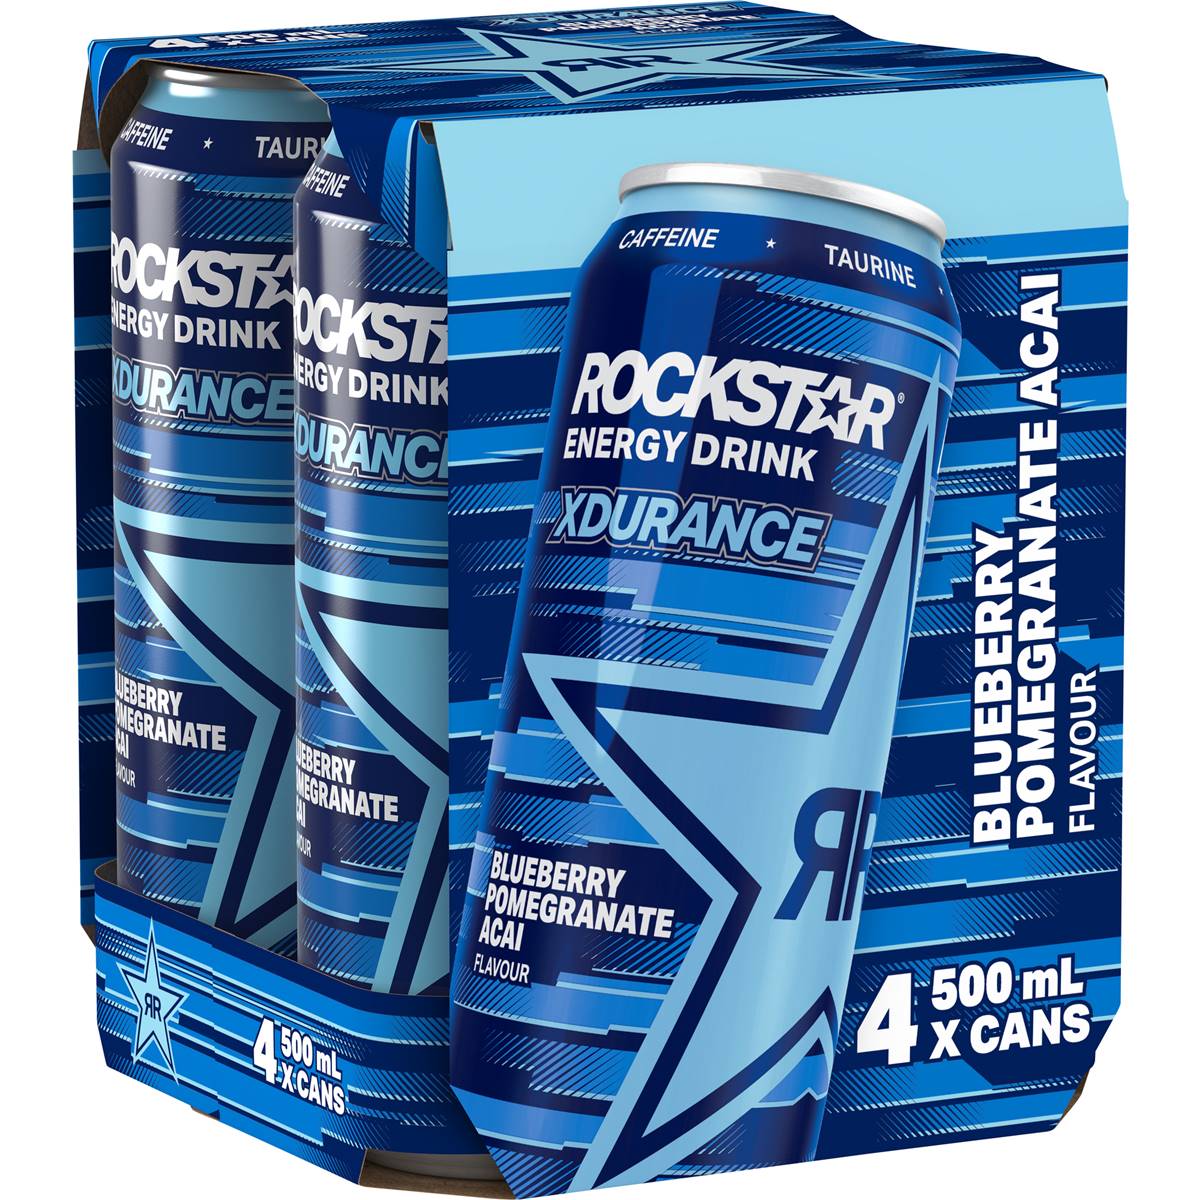 Calories in Rockstar Energy Drink Xdurance Blueberry Pomegranate Acai